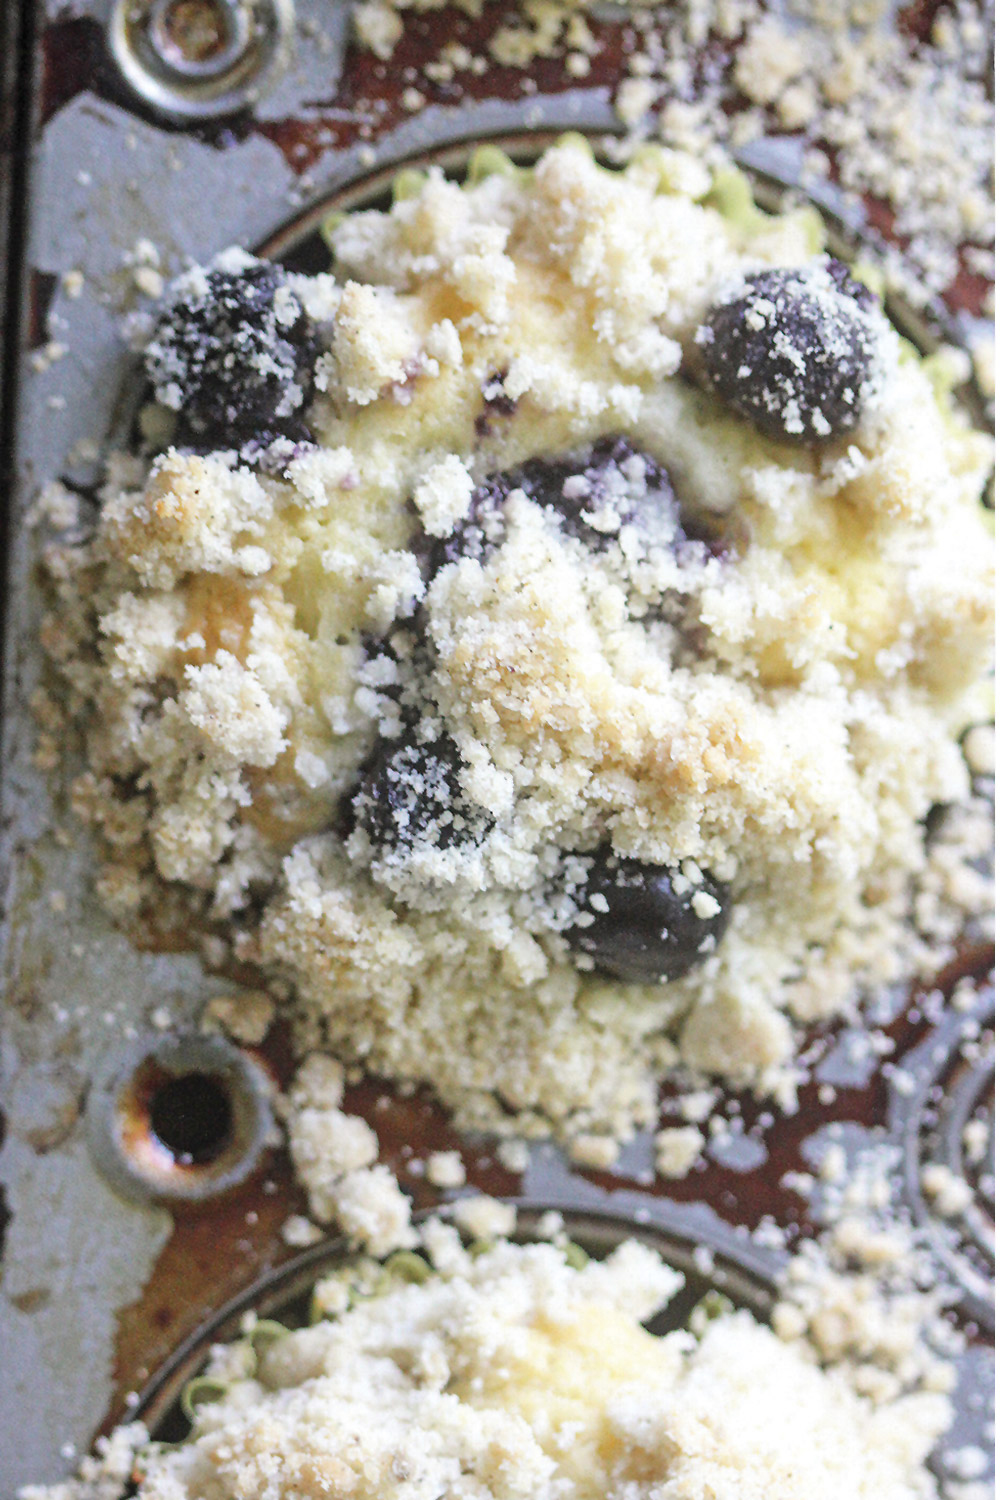 Cardamom blueberry muffin in tin showing crumble top and blueberries.